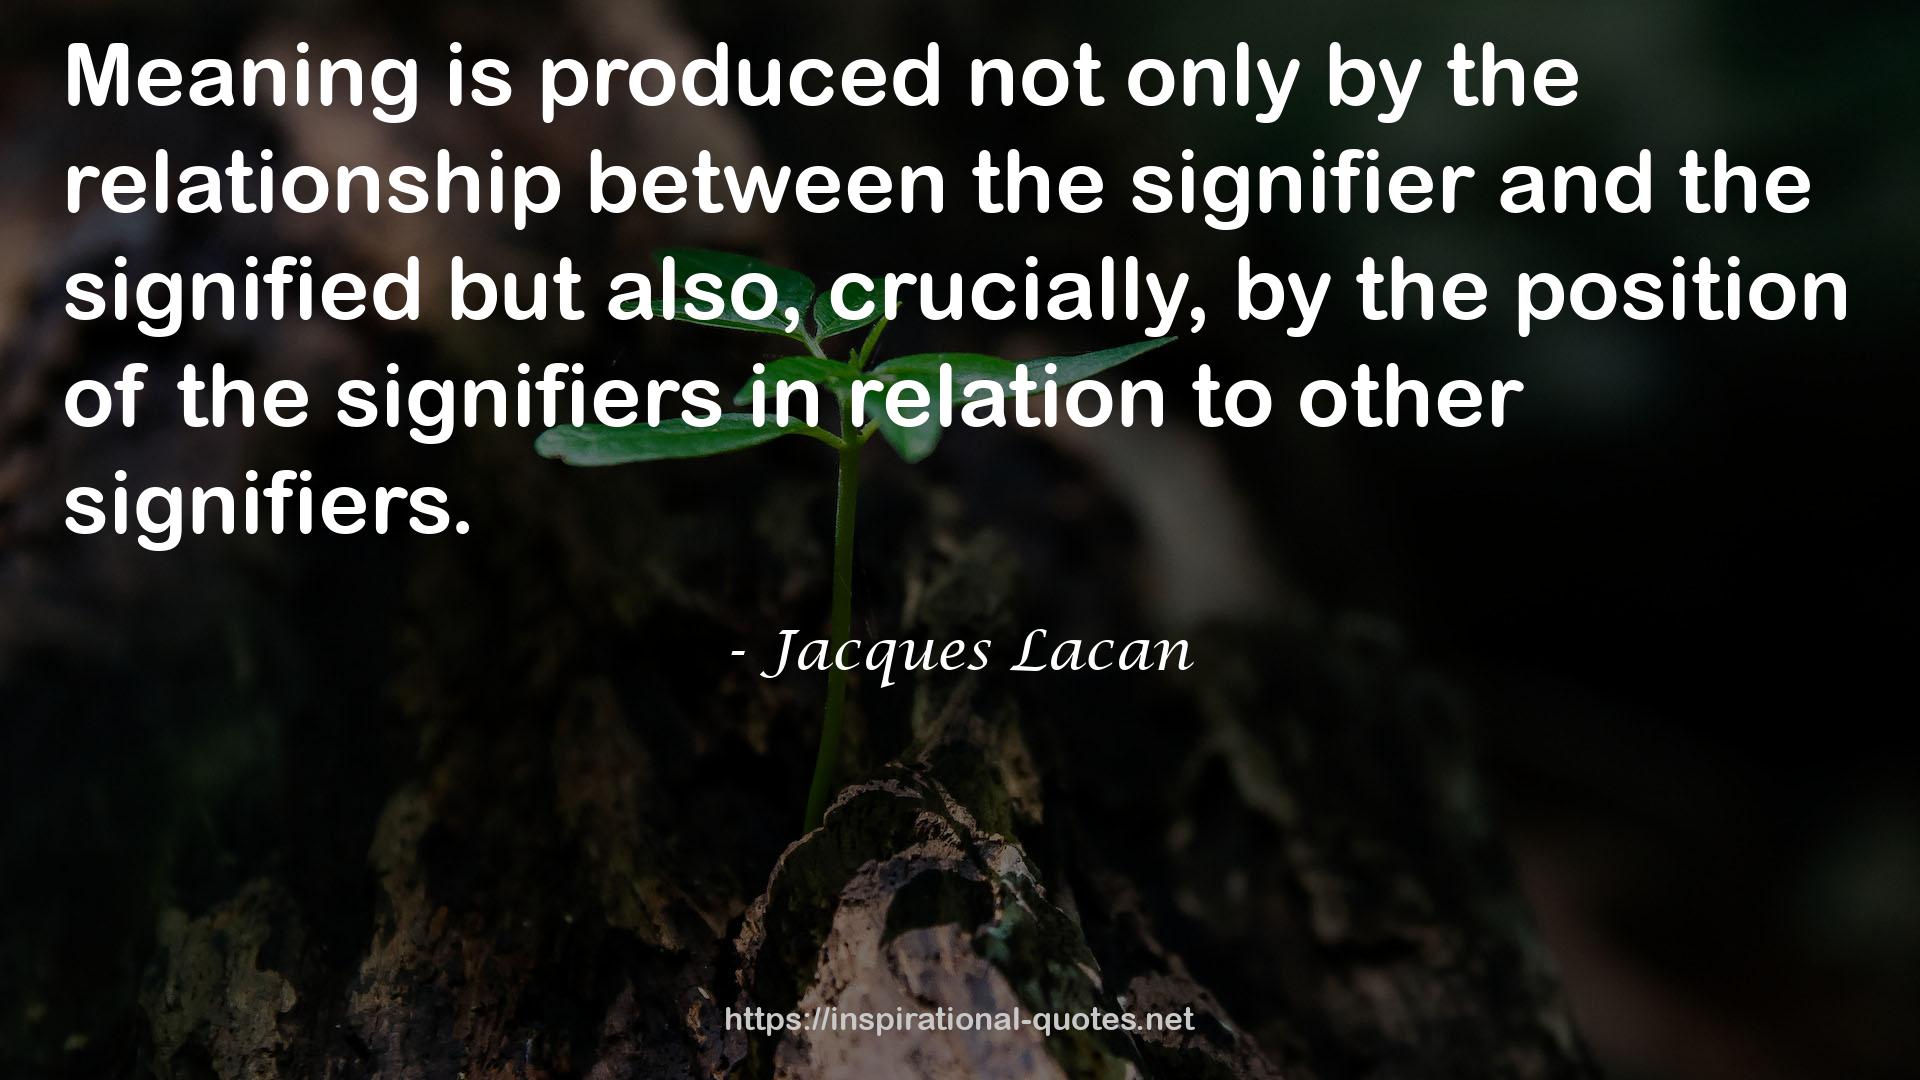 Jacques Lacan QUOTES